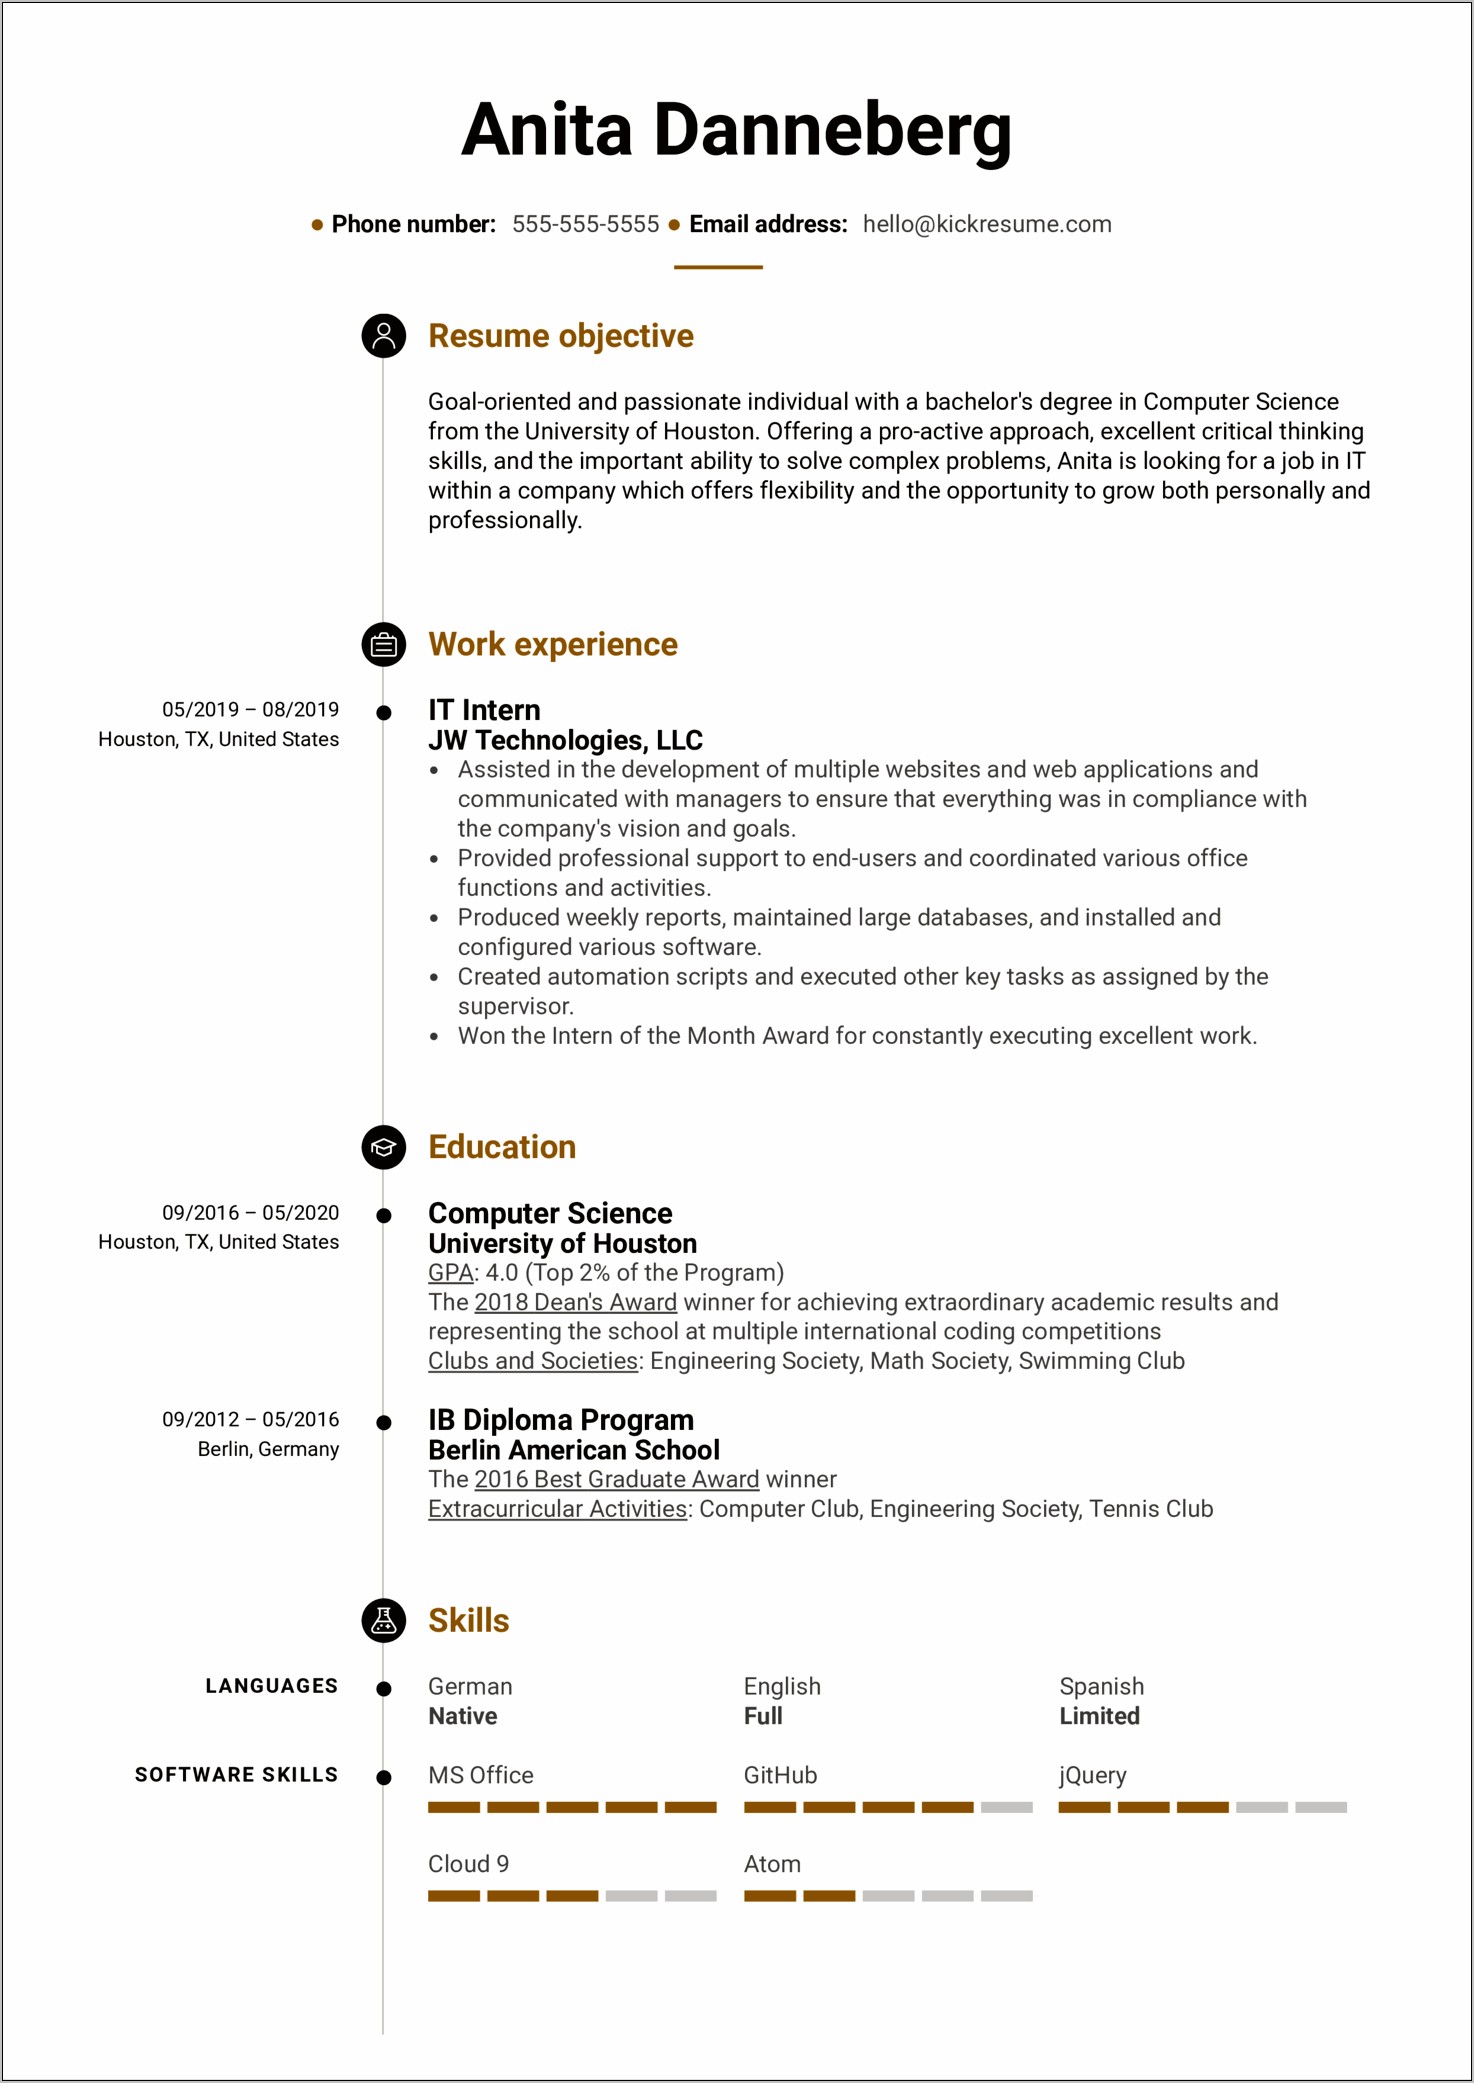 Sample Resume For New Grad In Computer Science